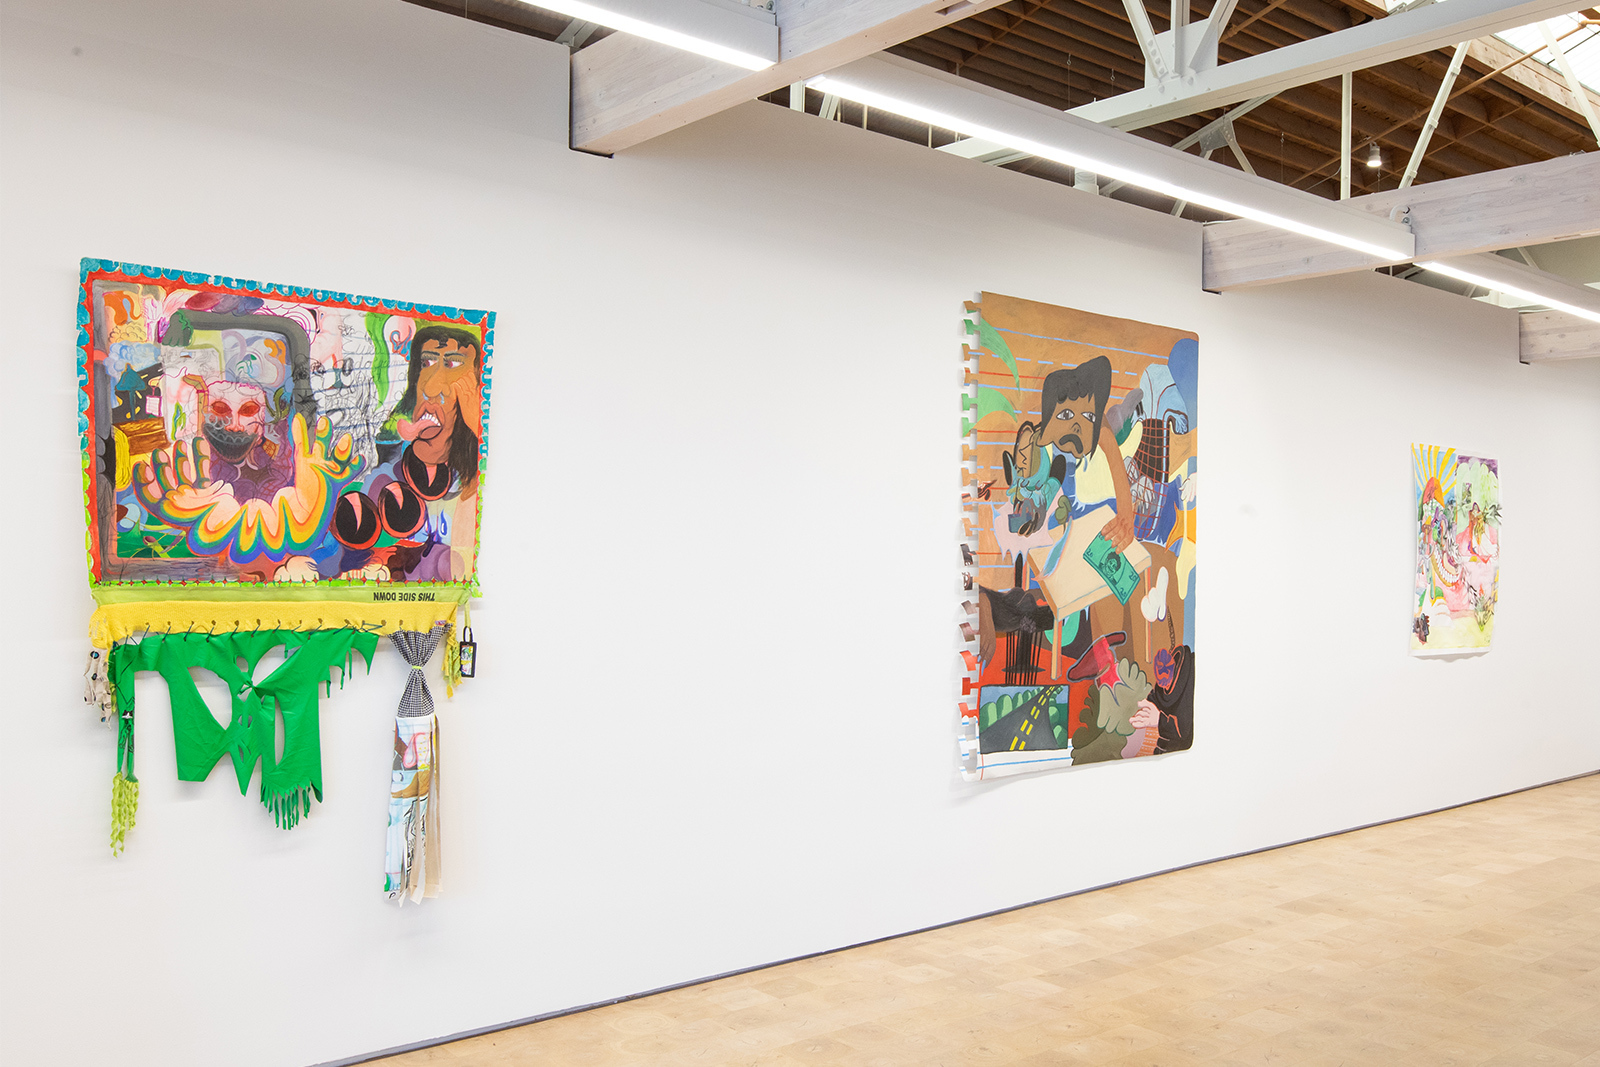 Thalia Rodgers - Three paintings hung on white gallery wall. The work mosts clearly in focus is unframed canvas with strips of green fabric sewn to the bottom. Painting include a face sticking a tongue out and a devilish looking face with red eyes.